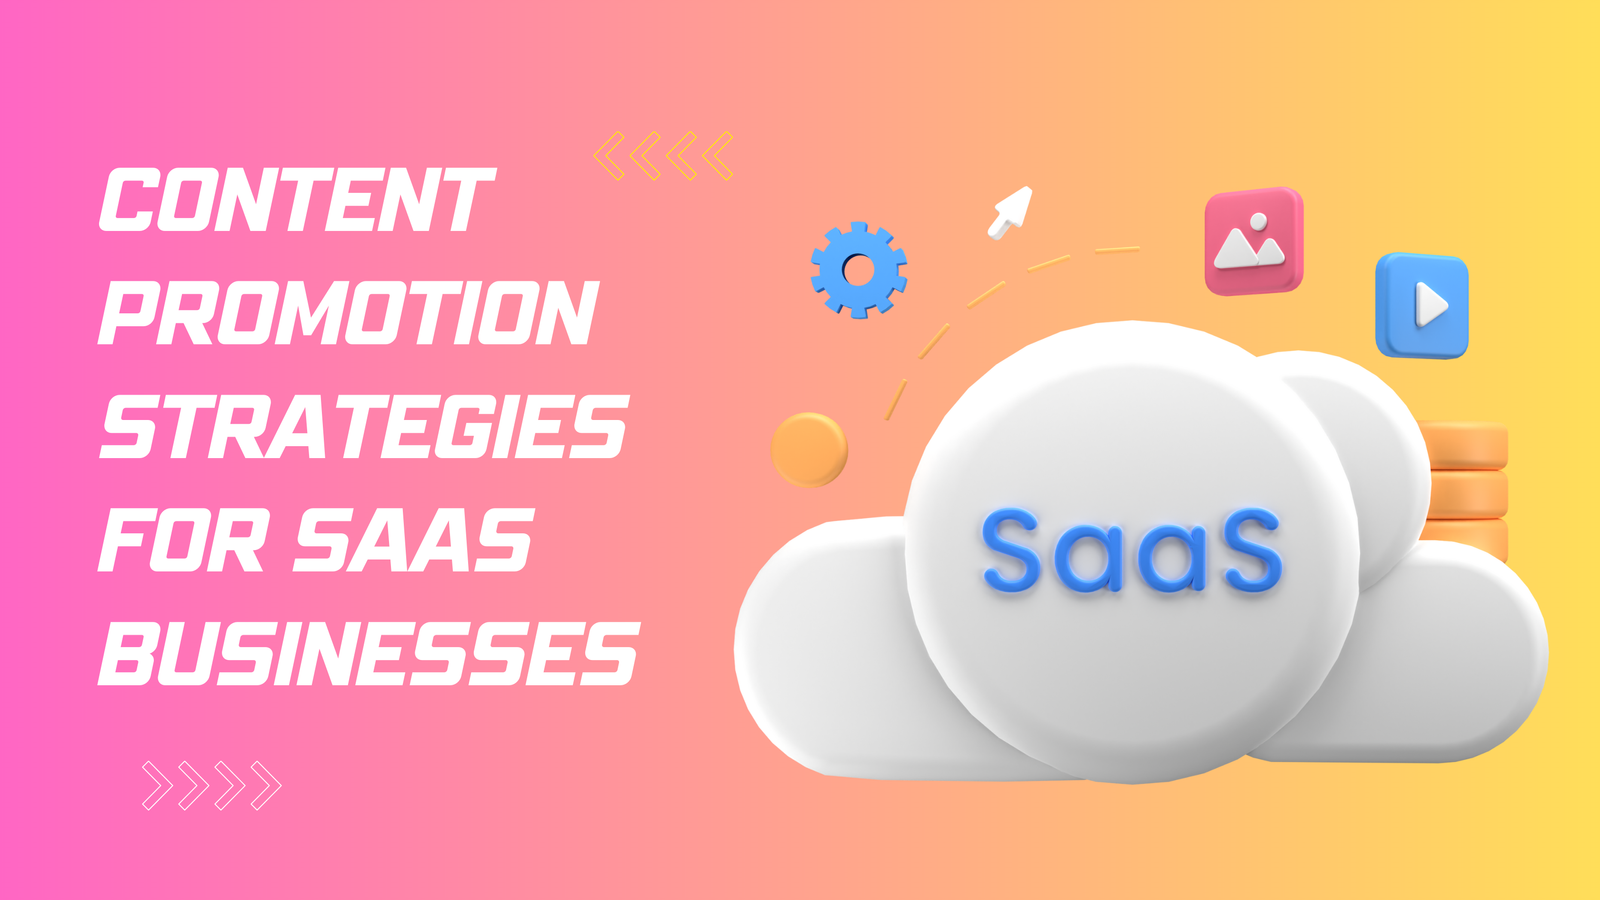 Content Promotion Strategies for SaaS Businesses